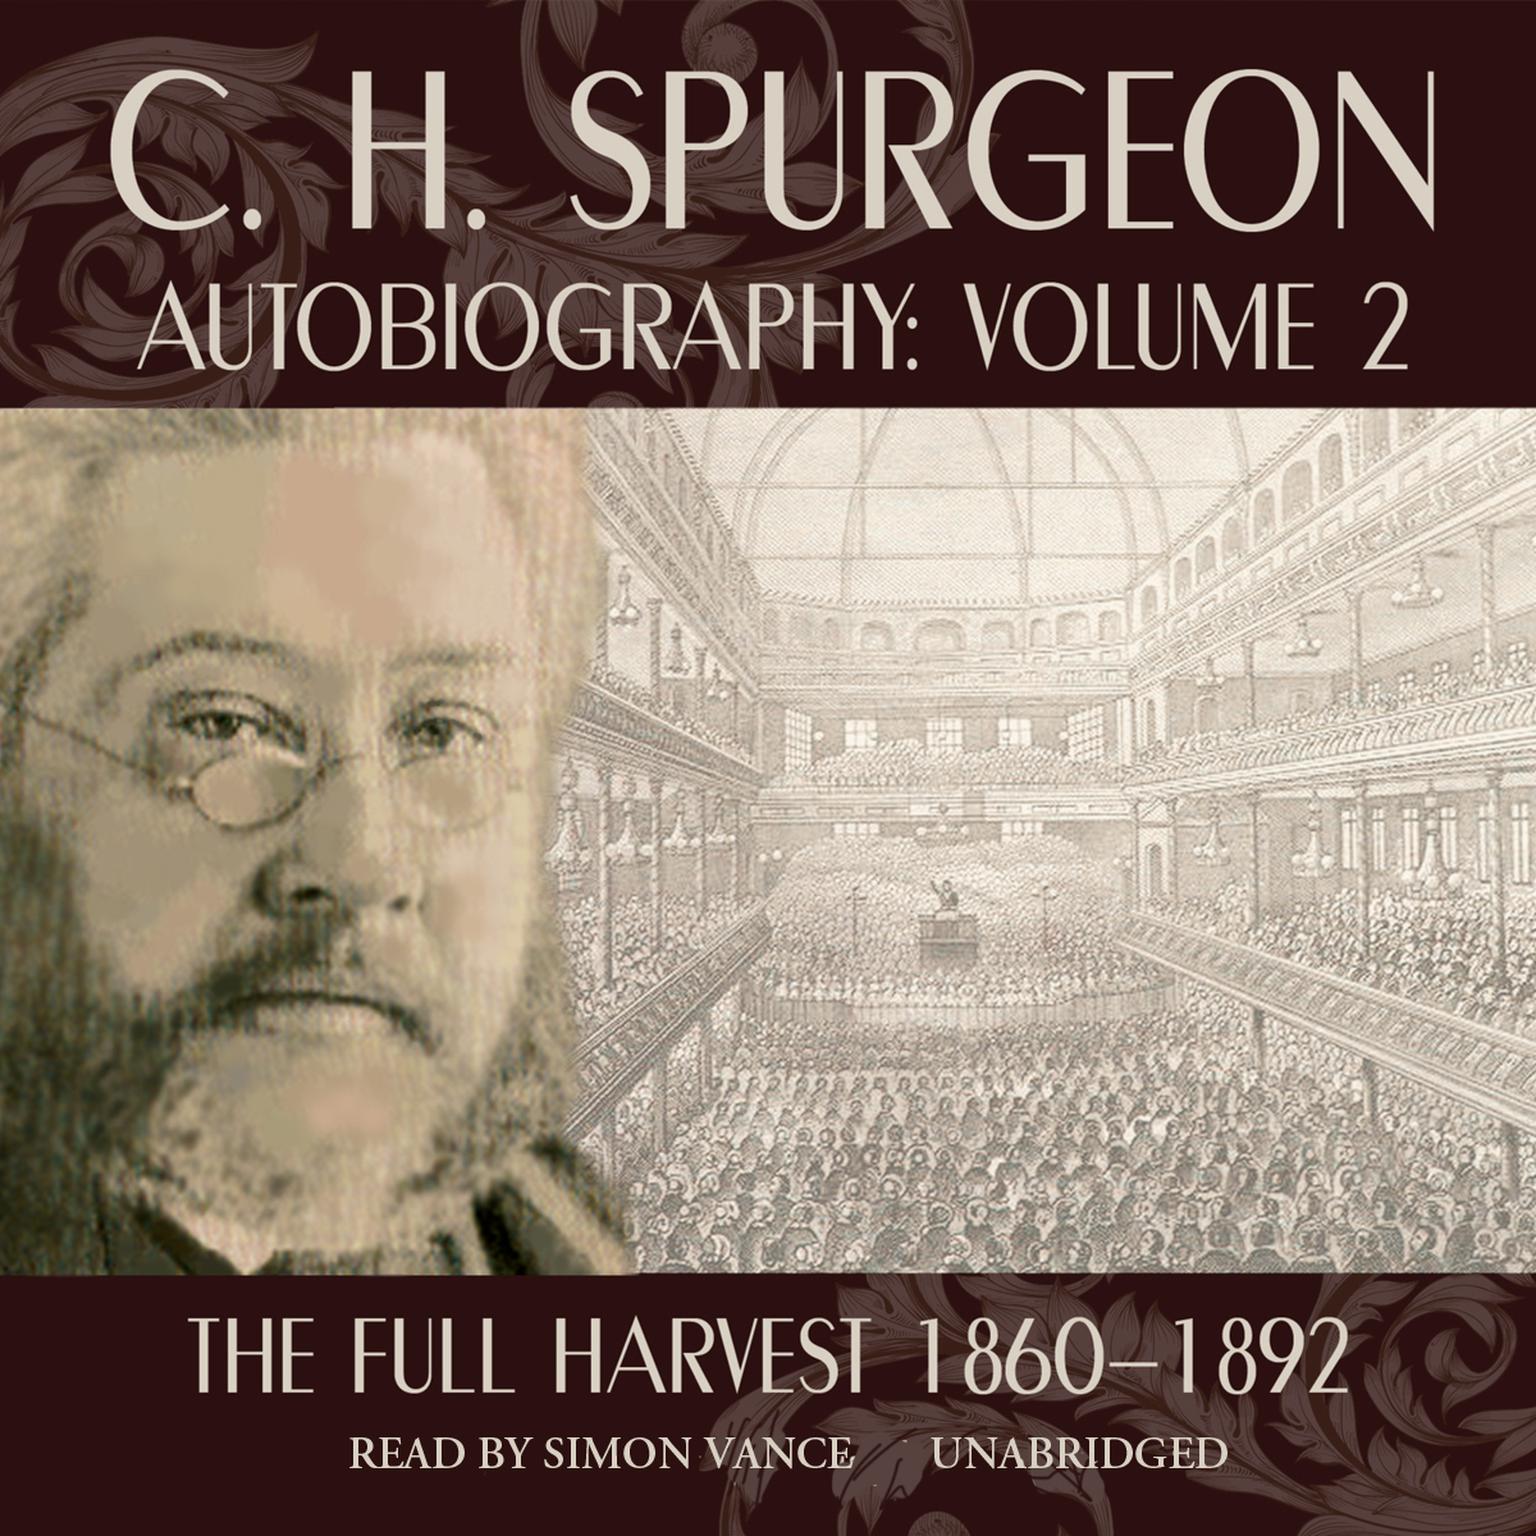 C. H. Spurgeon Autobiography, Vol. 2: The Full Harvest, 1860–1892 Audiobook, by Charles Spurgeon